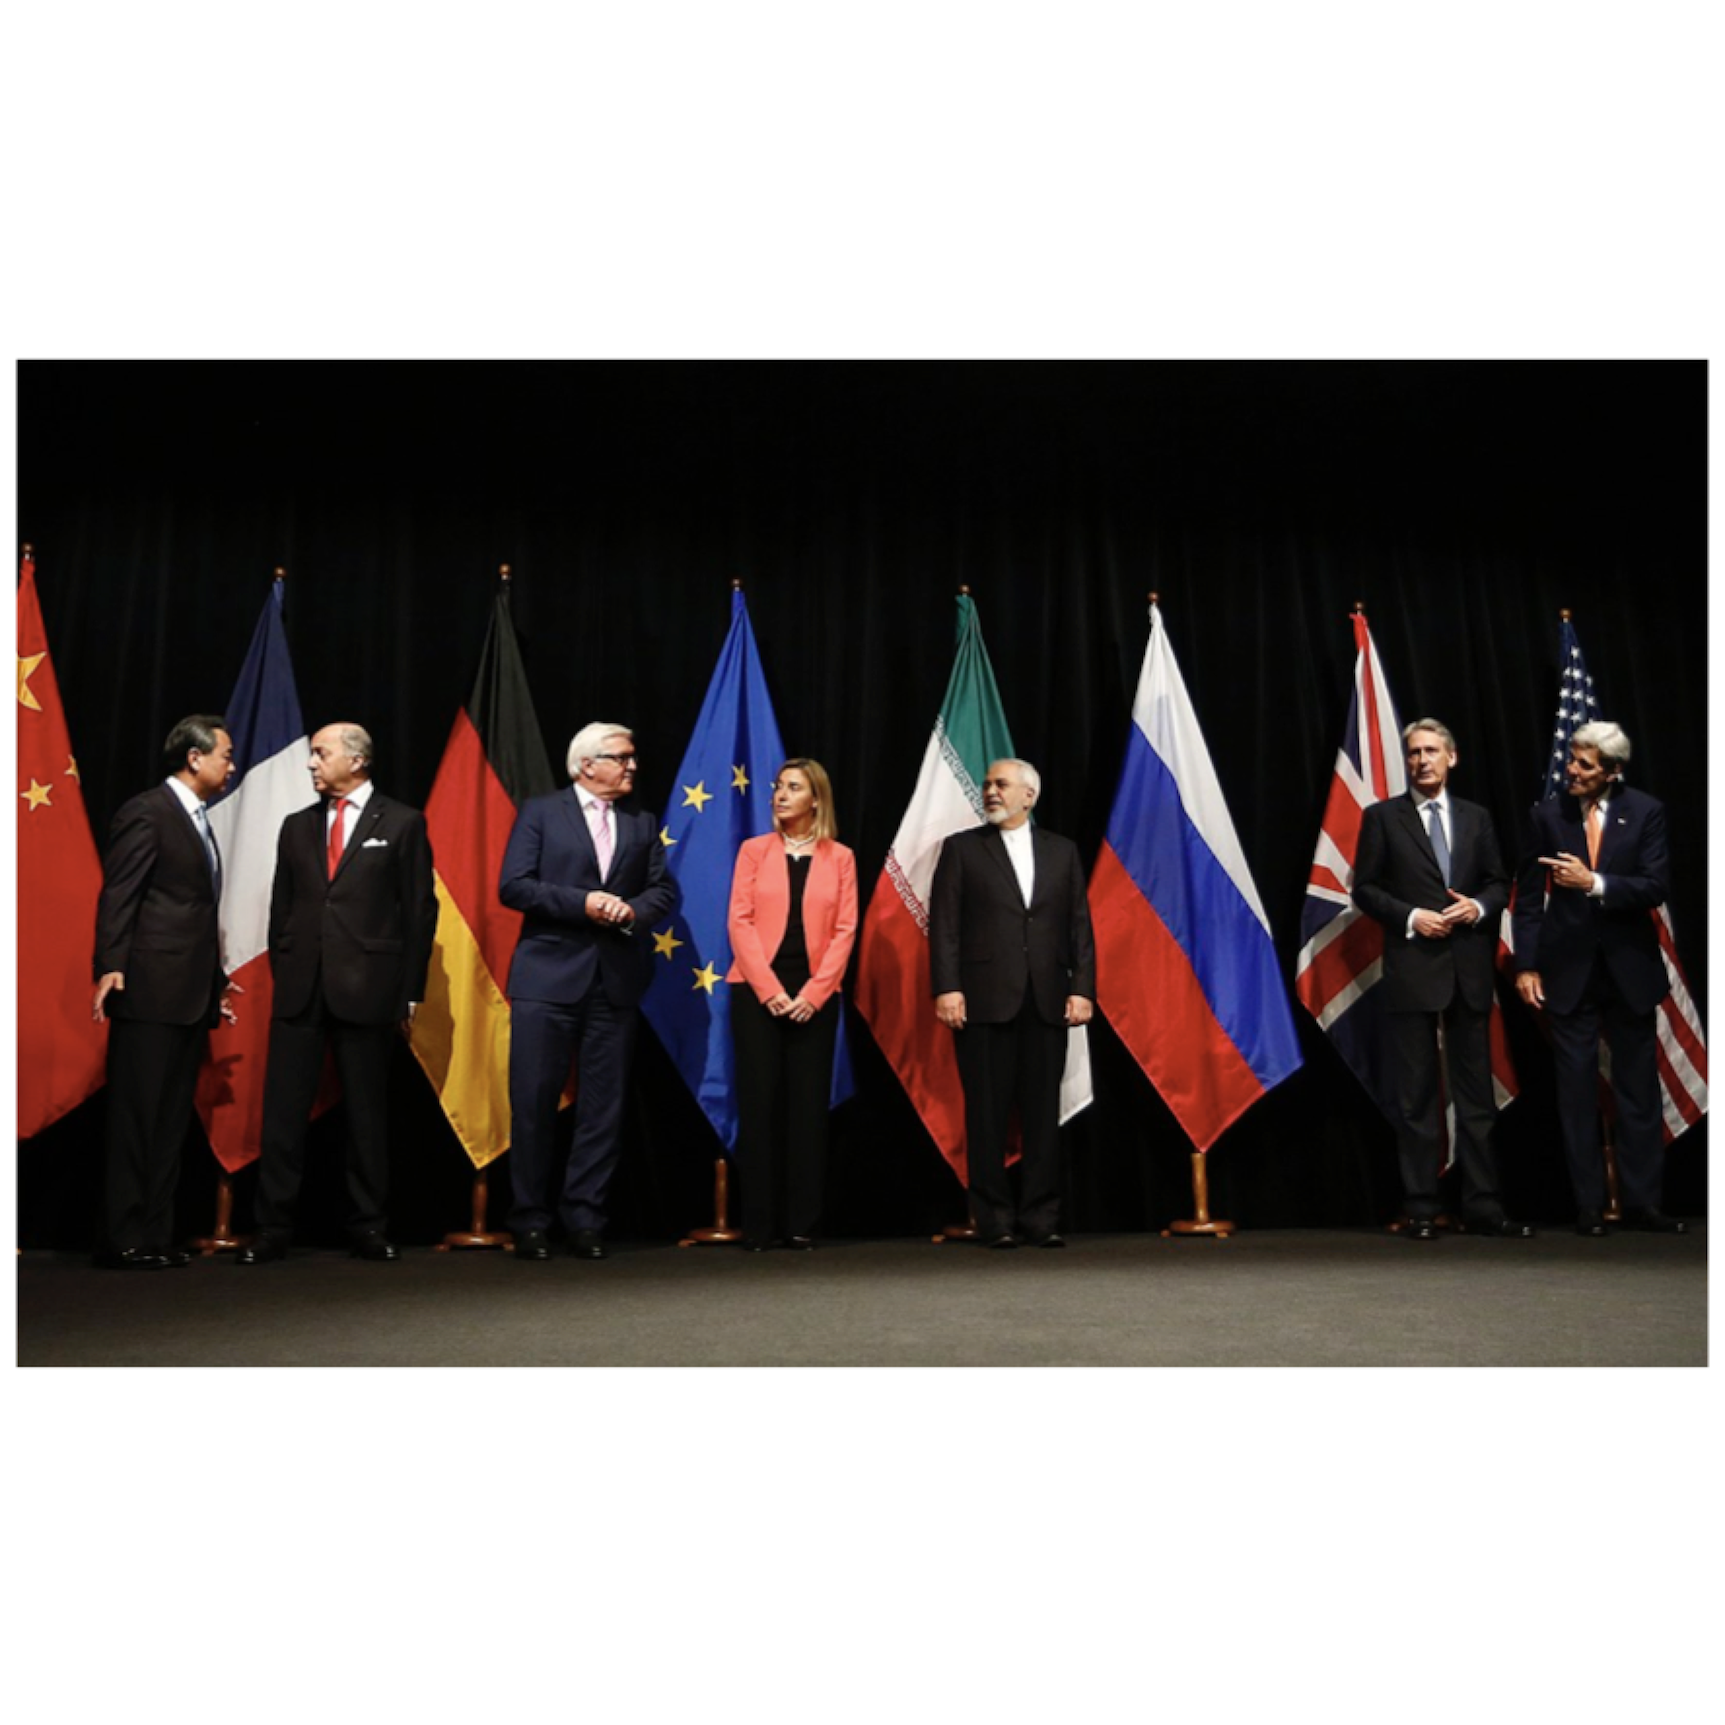 Reliable Partners? EU Foreign Policy and the Iran Nuclear Agreement JCPoA